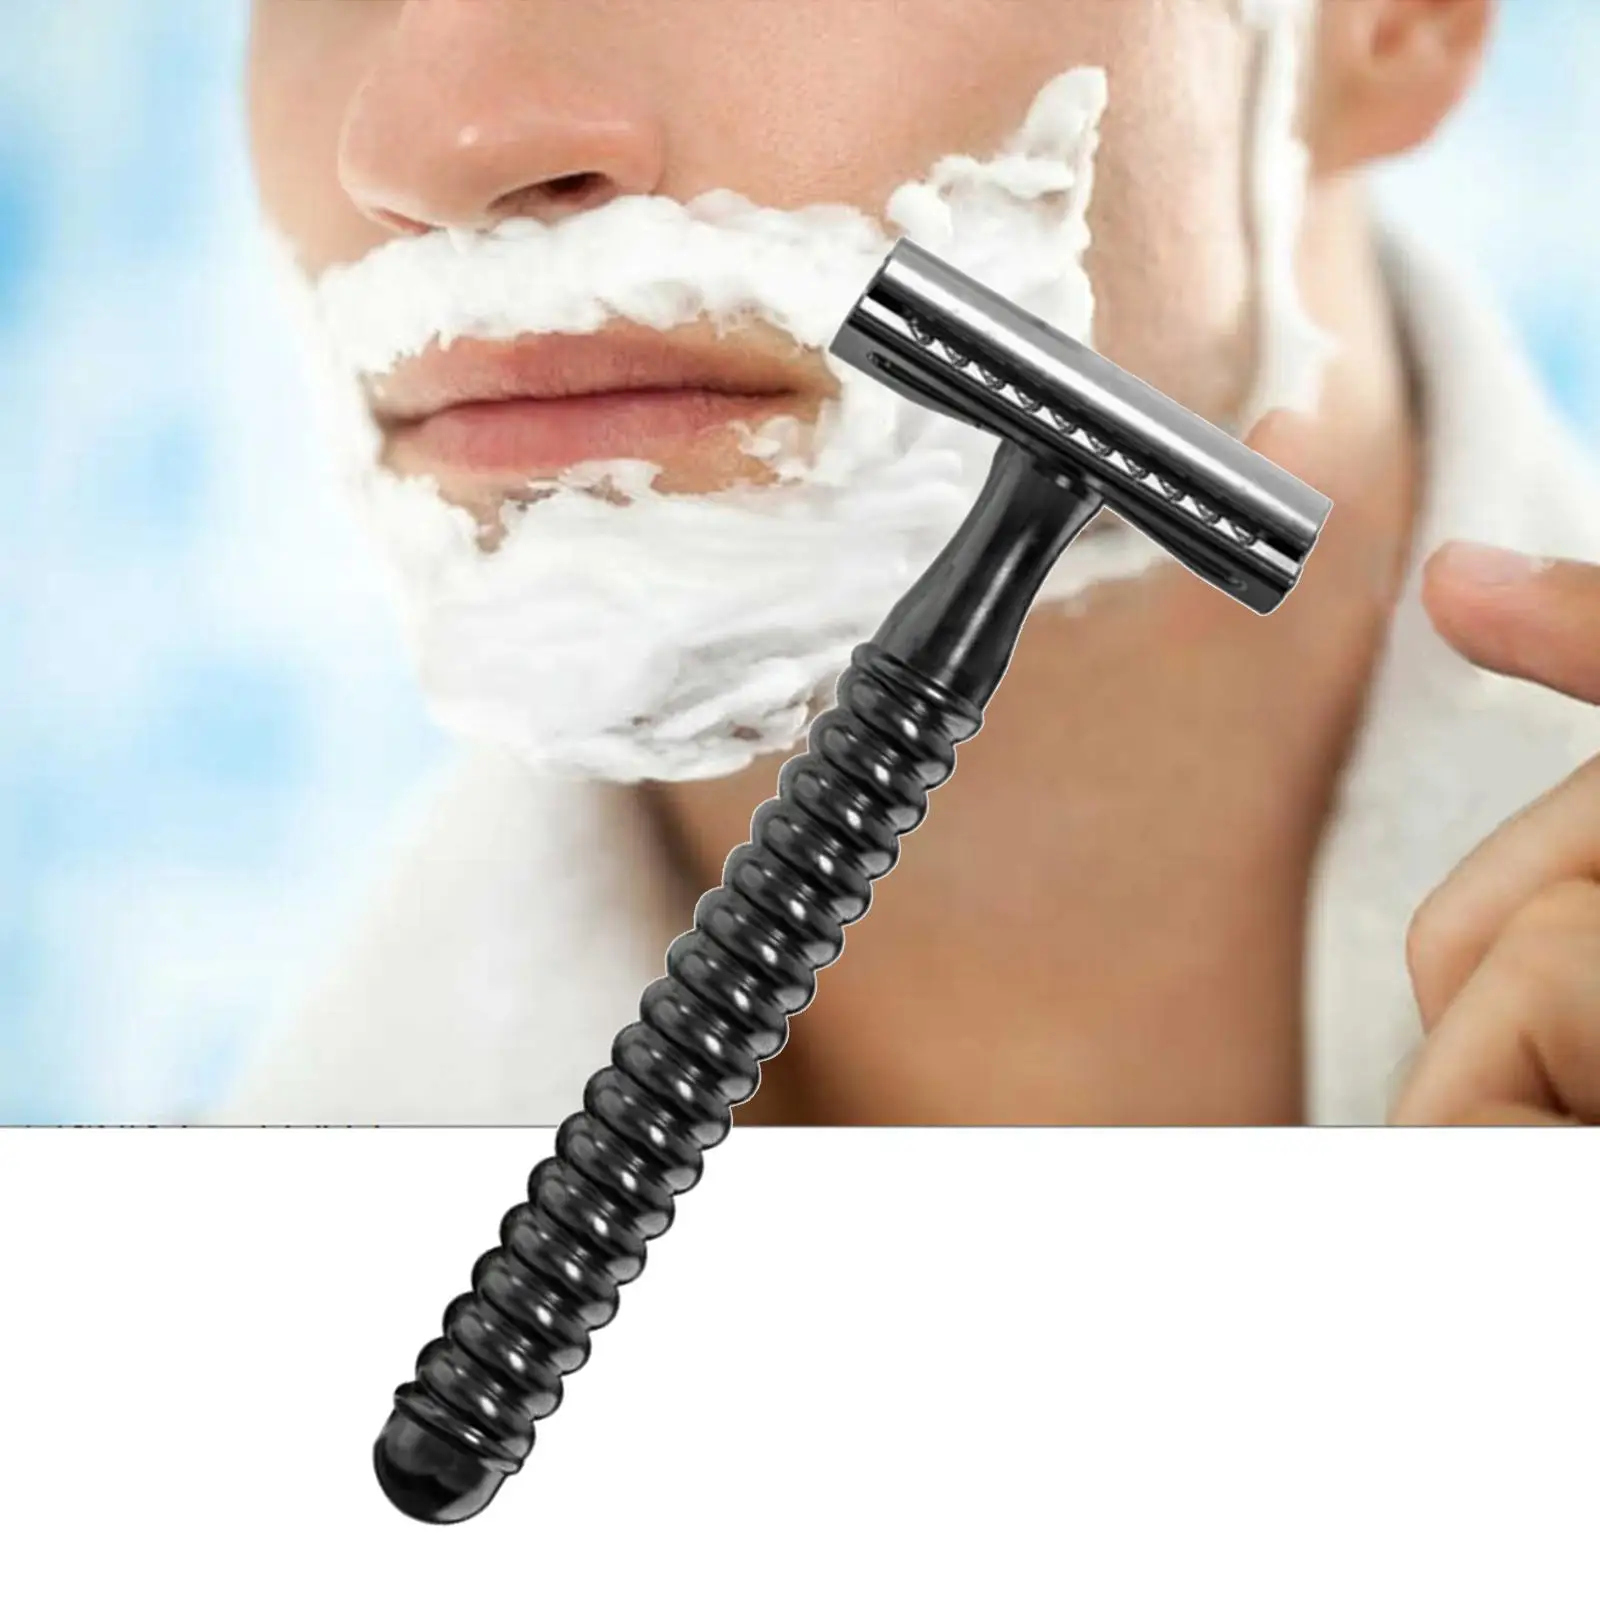 Double Edge Safety  Long Handle Premium Easy to Clean Travel Reusable Gifts Wet Shaving Close clean easily Use Stylish  Shave